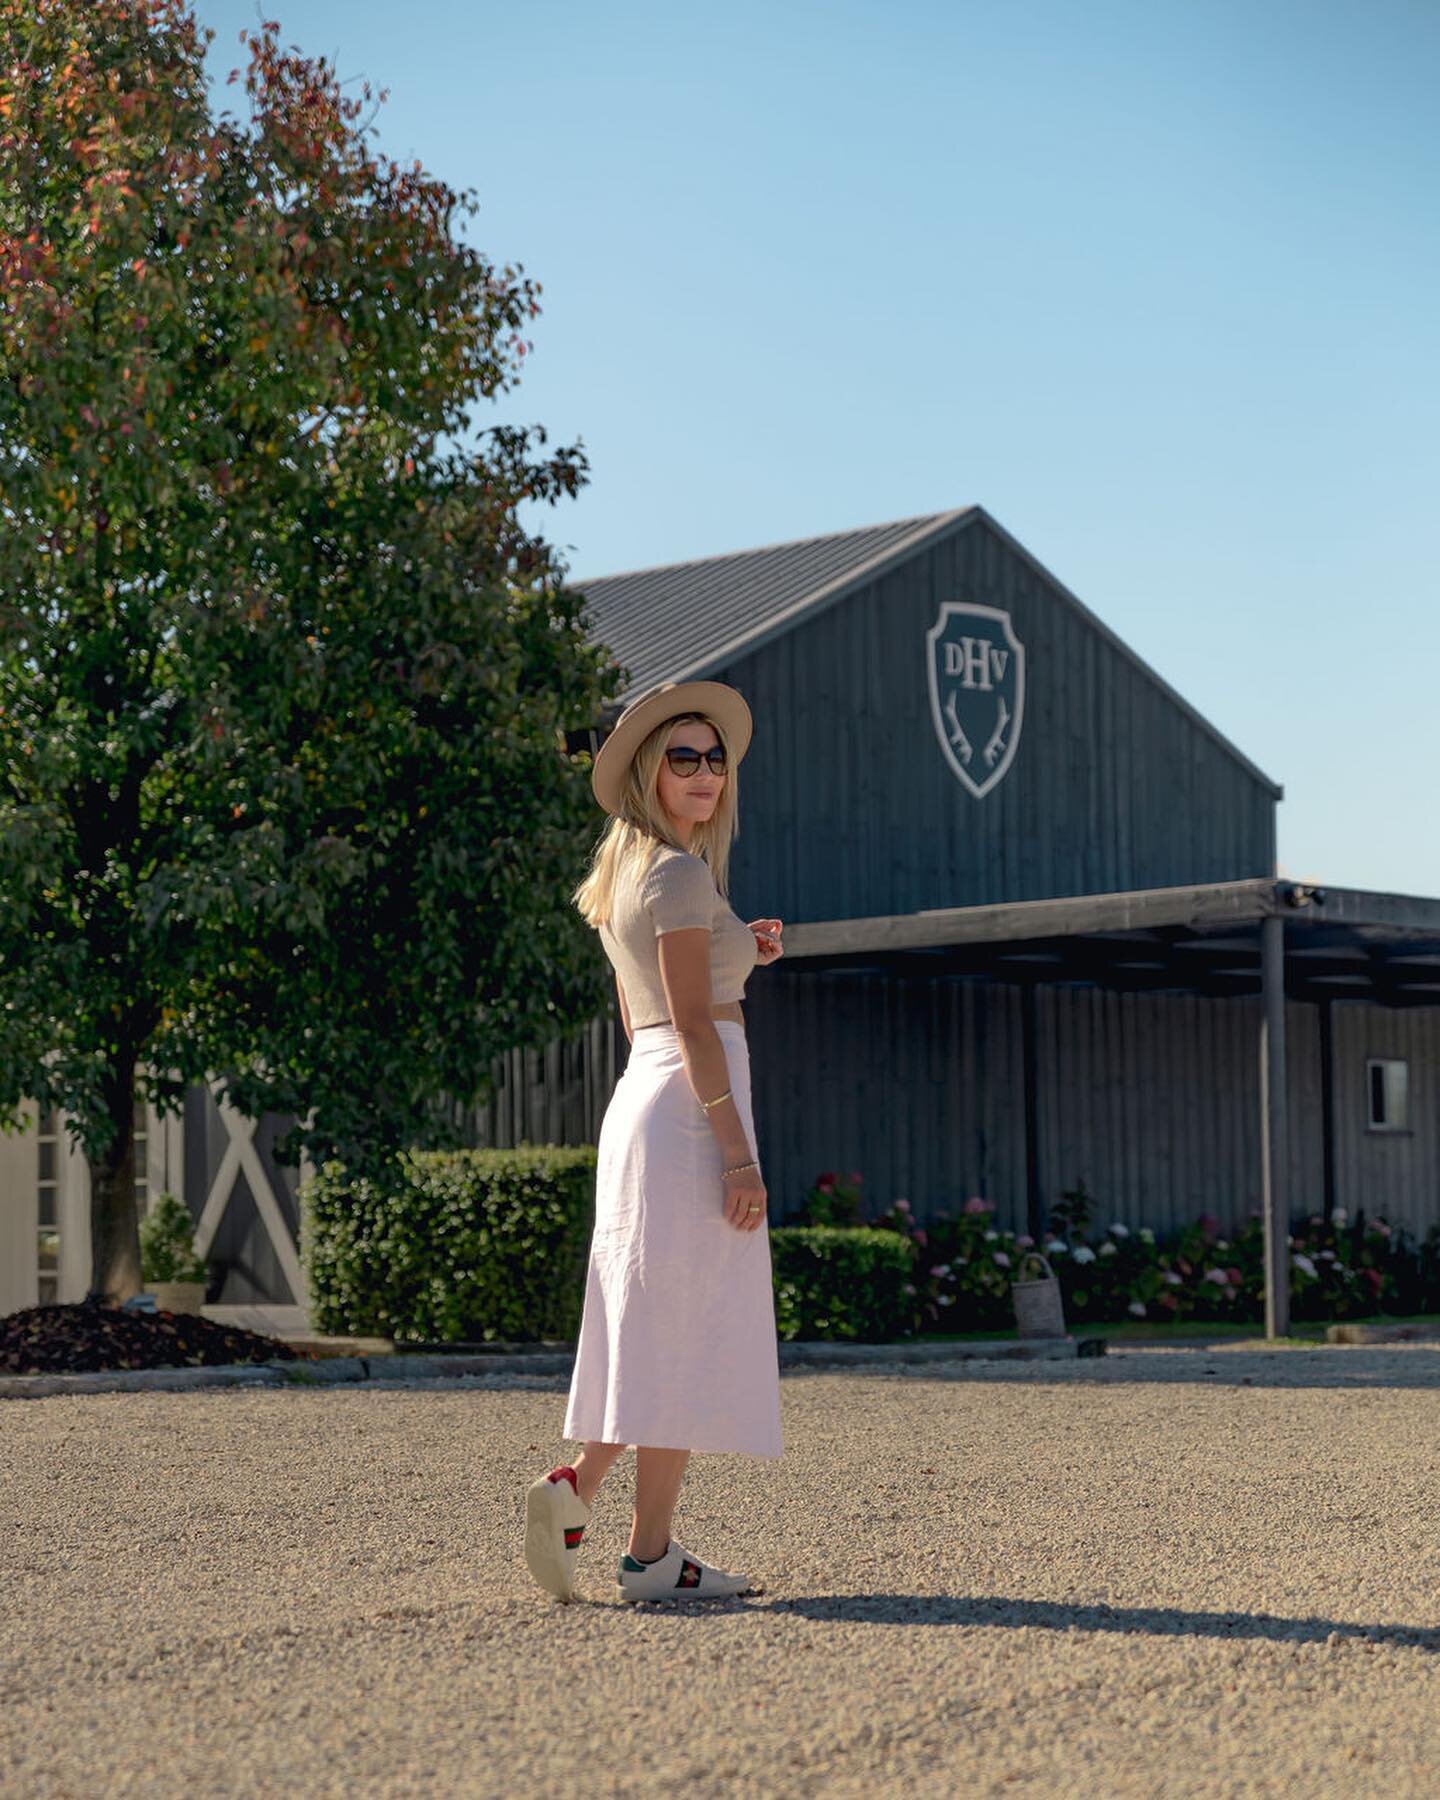 Picture Perfect&hellip;
@ginacartwrightmakeup looking stunning as always&hellip;her backdrop ain&rsquo;t so bad either! Slide across for more&hellip;👌

Both the Stables and the Barnhouse (pictured here) provide beautiful and striking photo moments. 